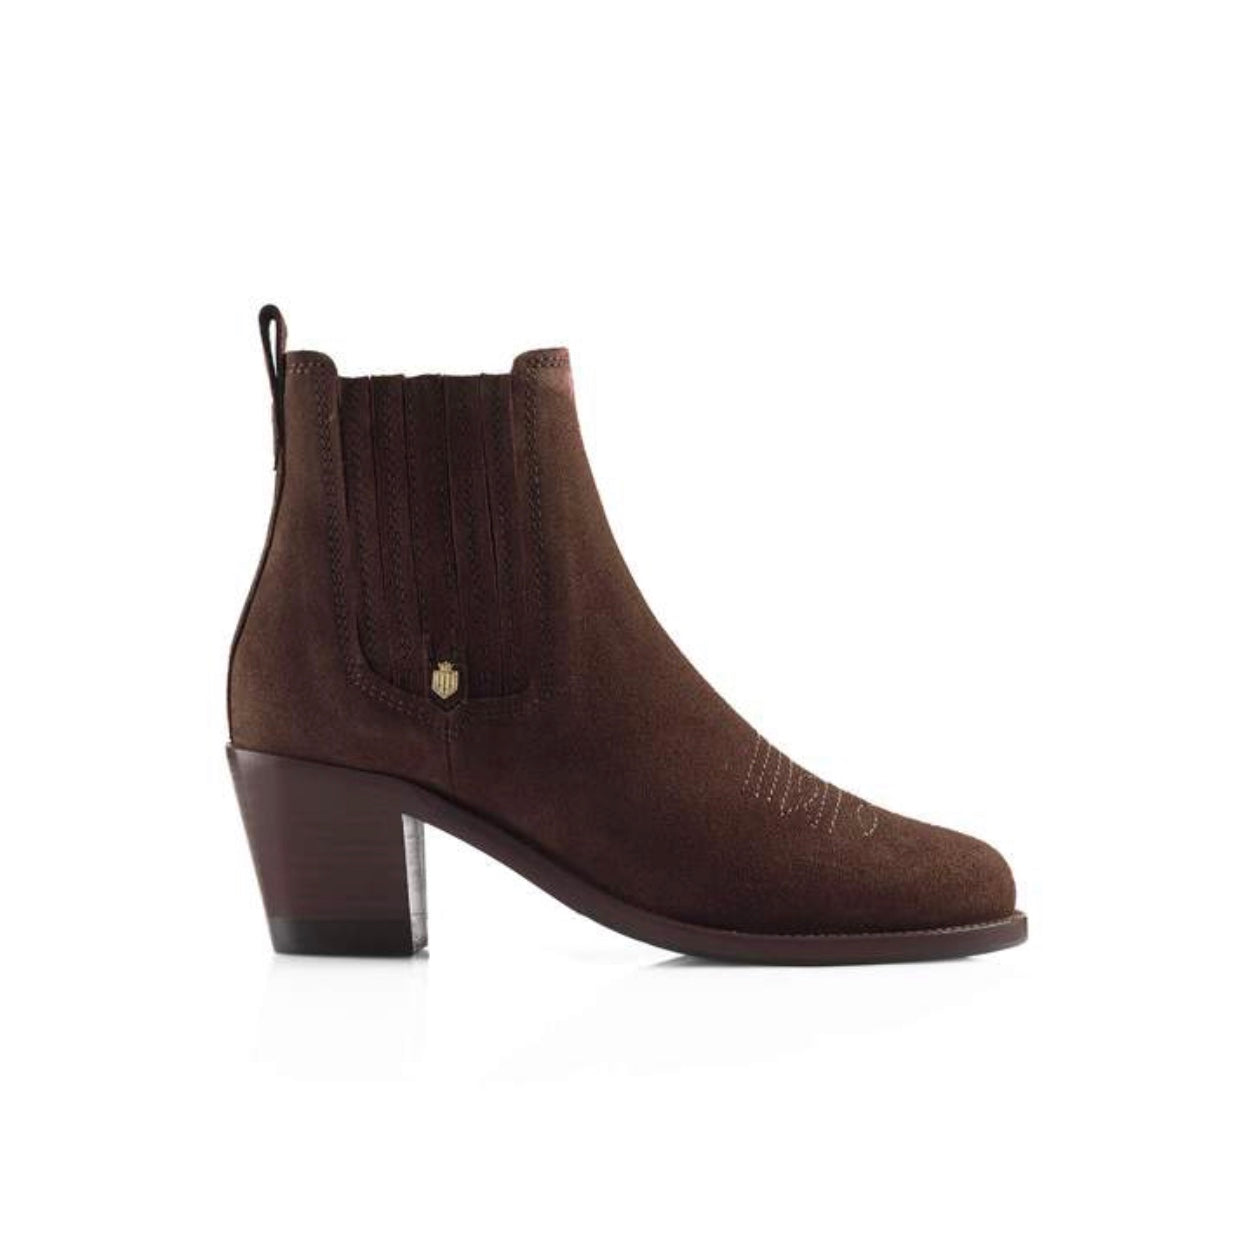 THE FAIRFAX & FAVOR ROCKINGHAM ANKLE BOOTS - TAUPE